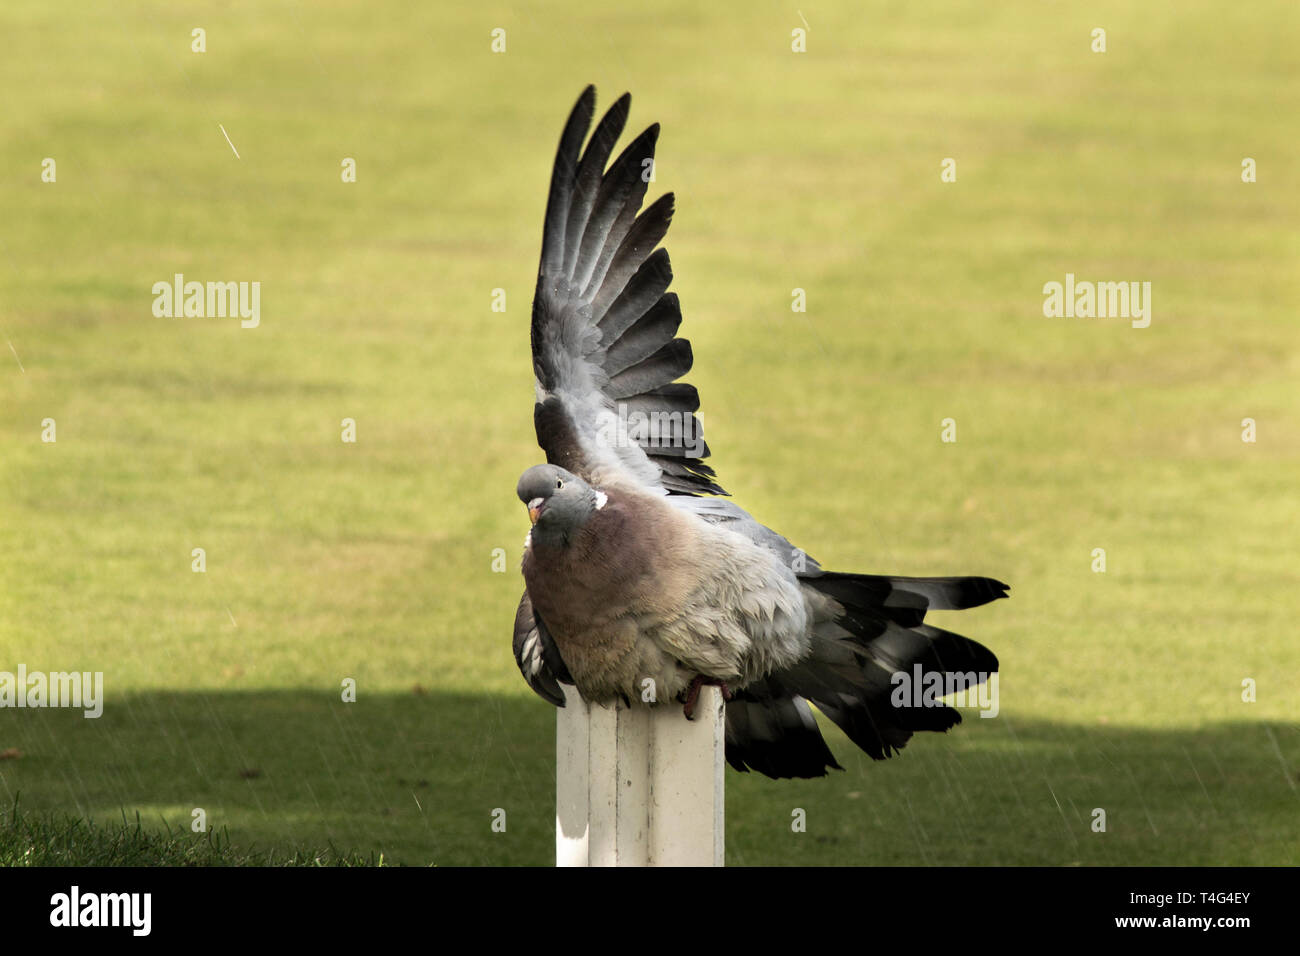 Pigeon with one wing in the air looking as though it is asking permission Stock Photo